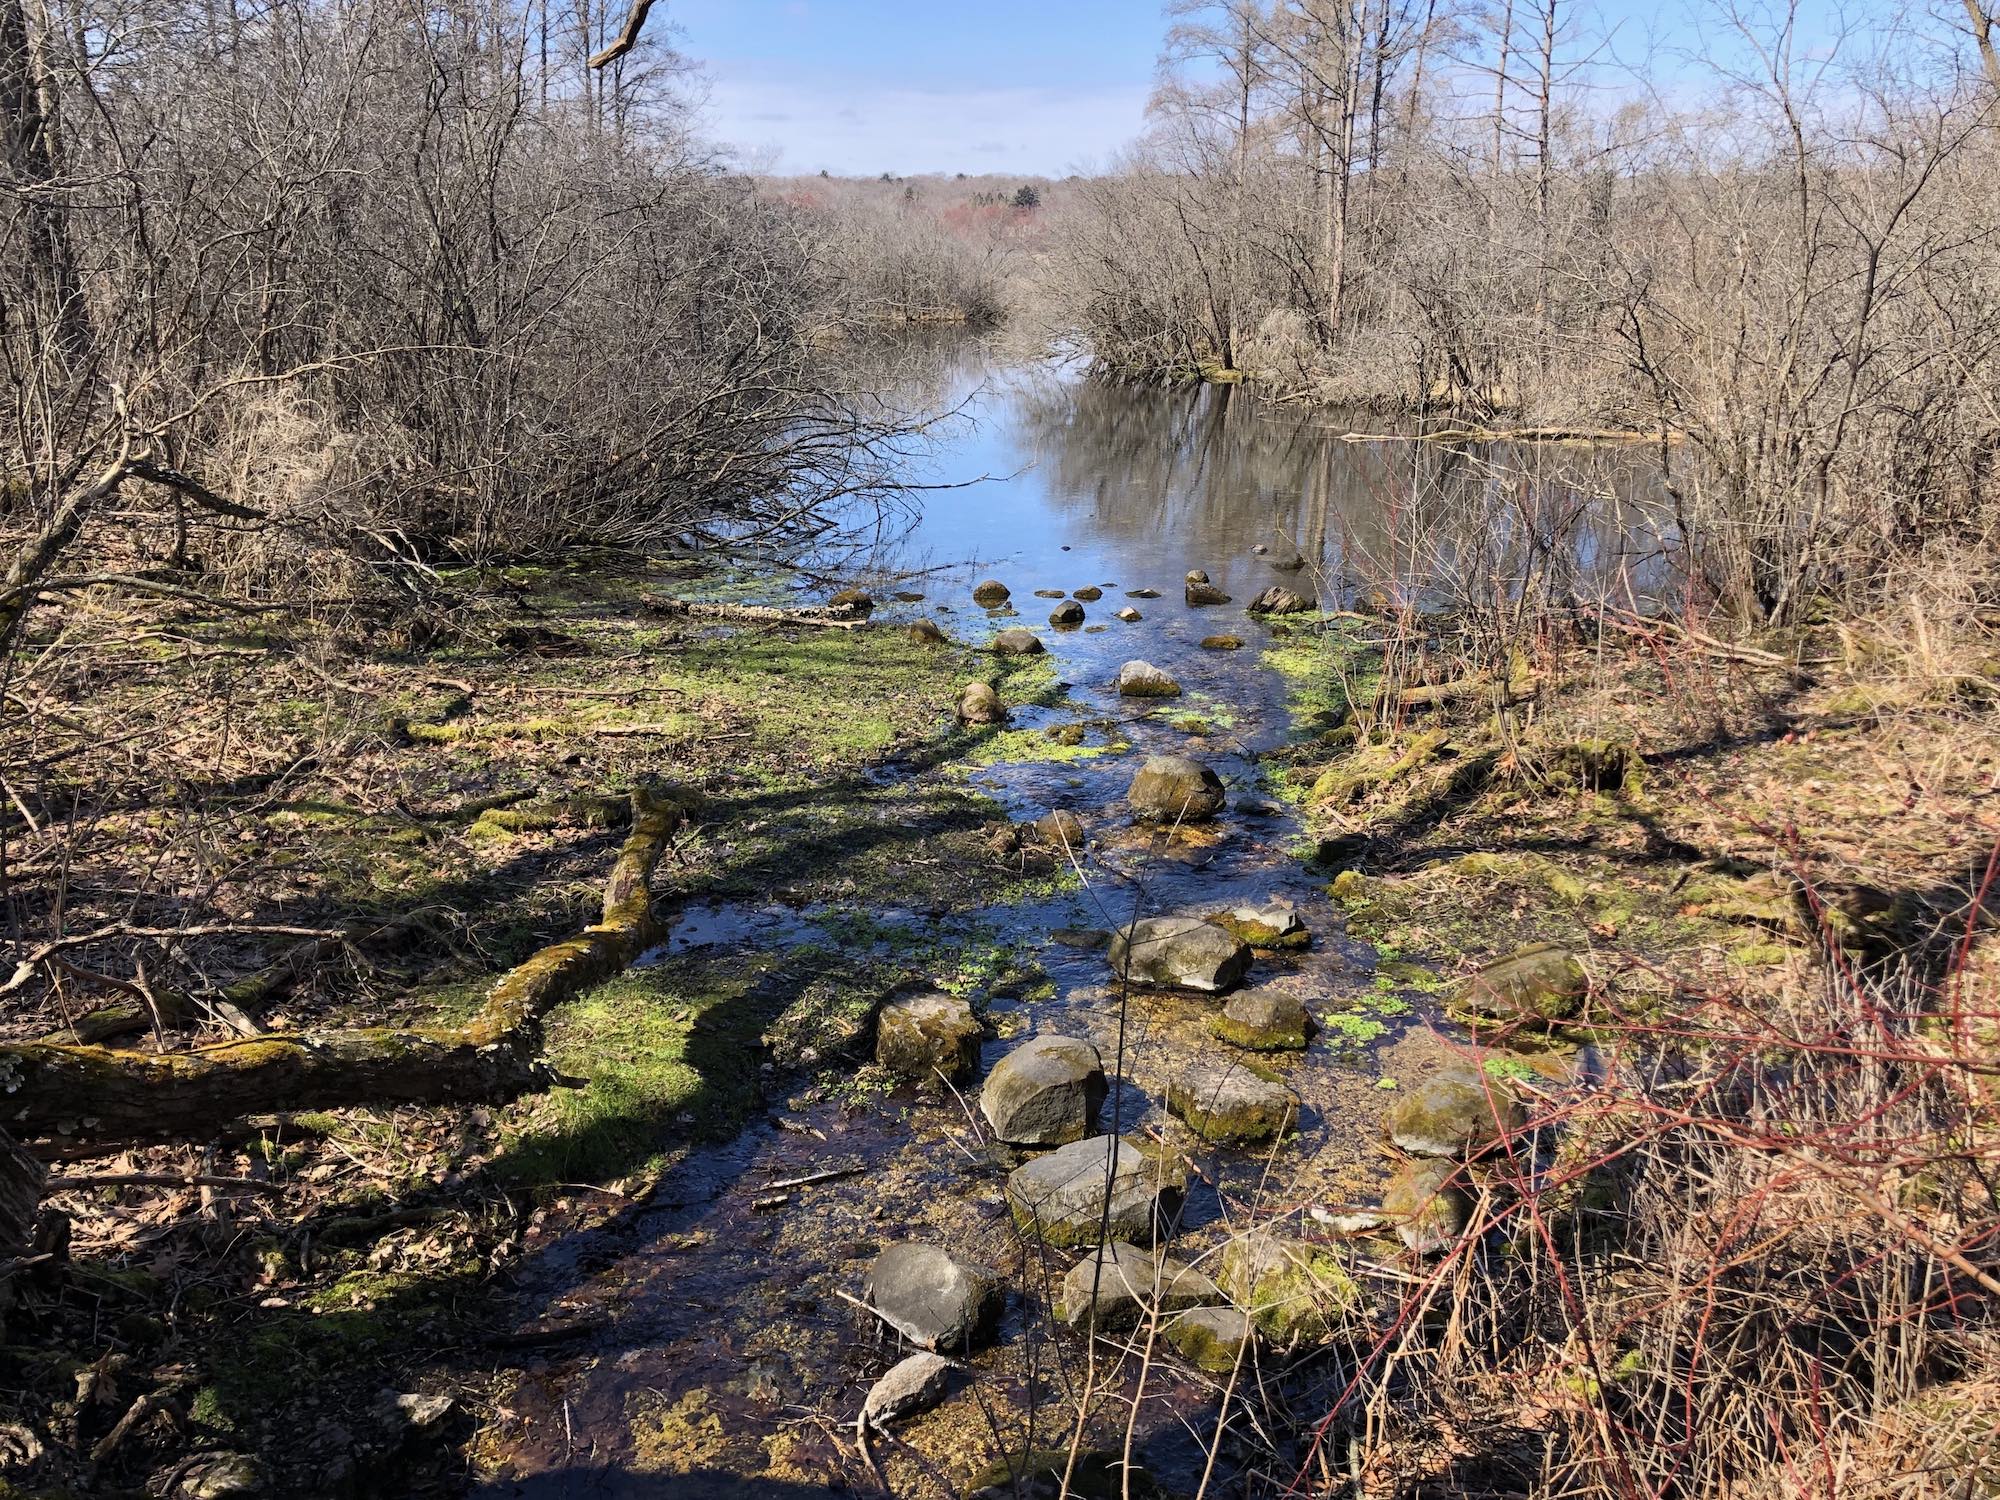 Big Spring flowing into Lake Wingra in the University of Wisconsin Arboretum on March 21, 2020.